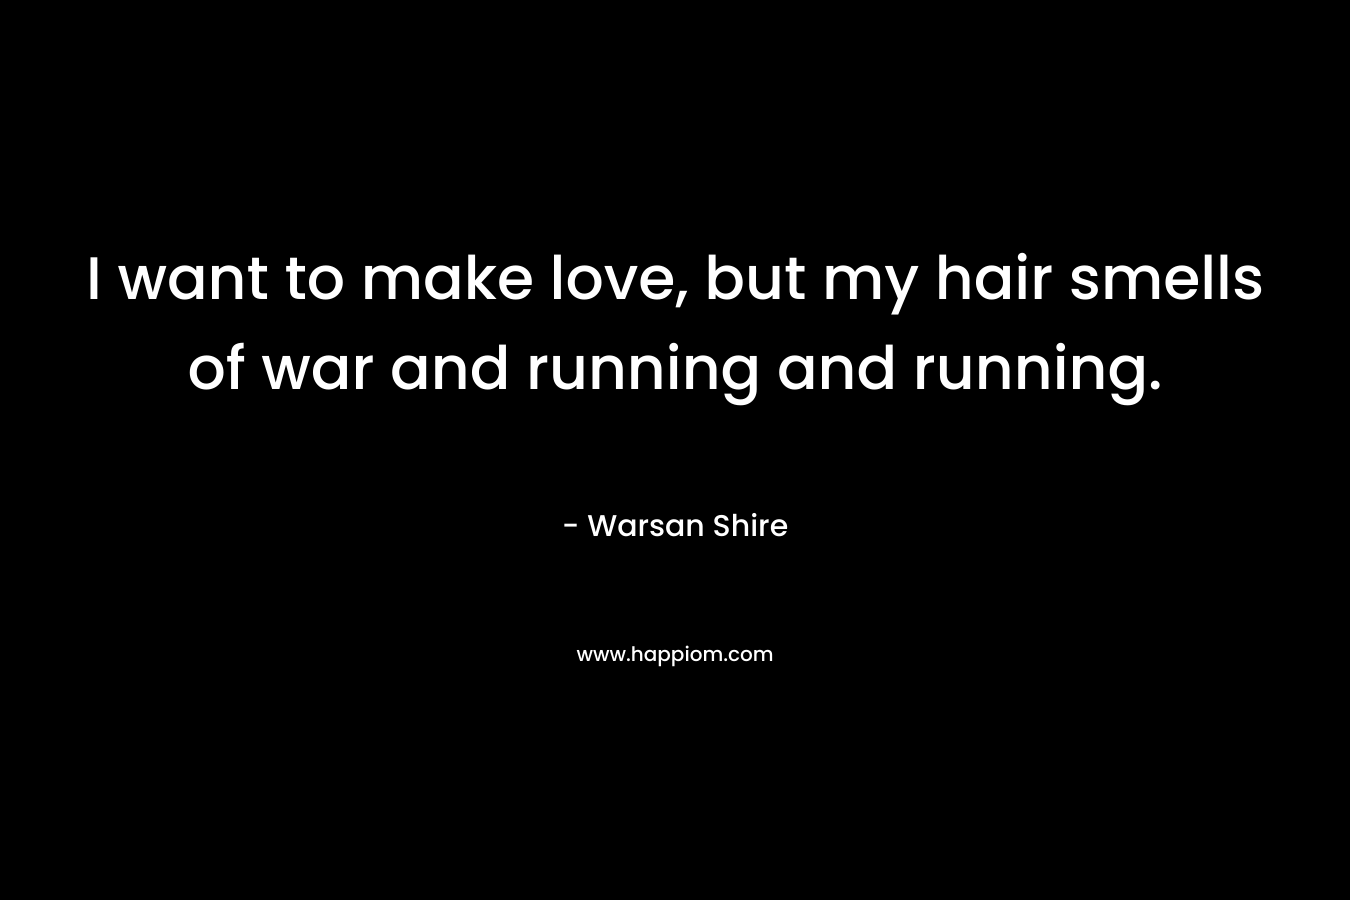 I want to make love, but my hair smells of war and running and running. – Warsan Shire